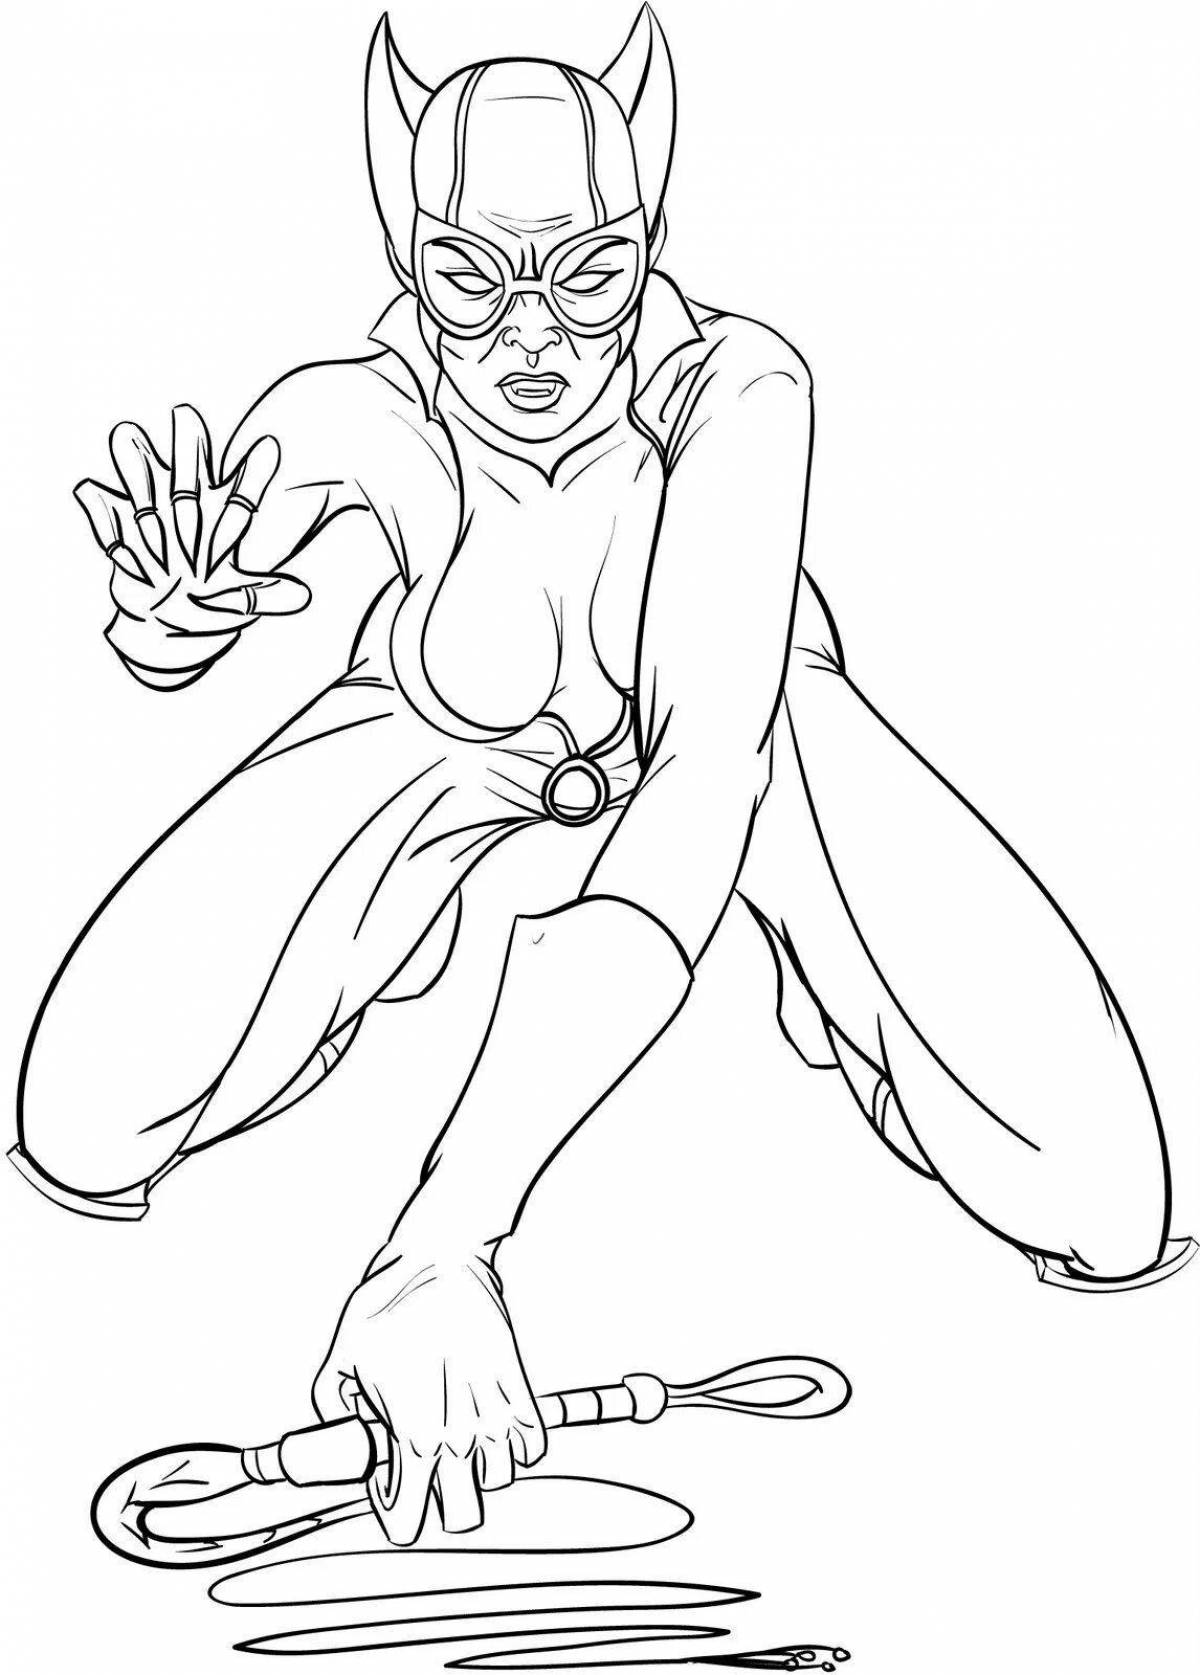 Colorful super cat coloring page